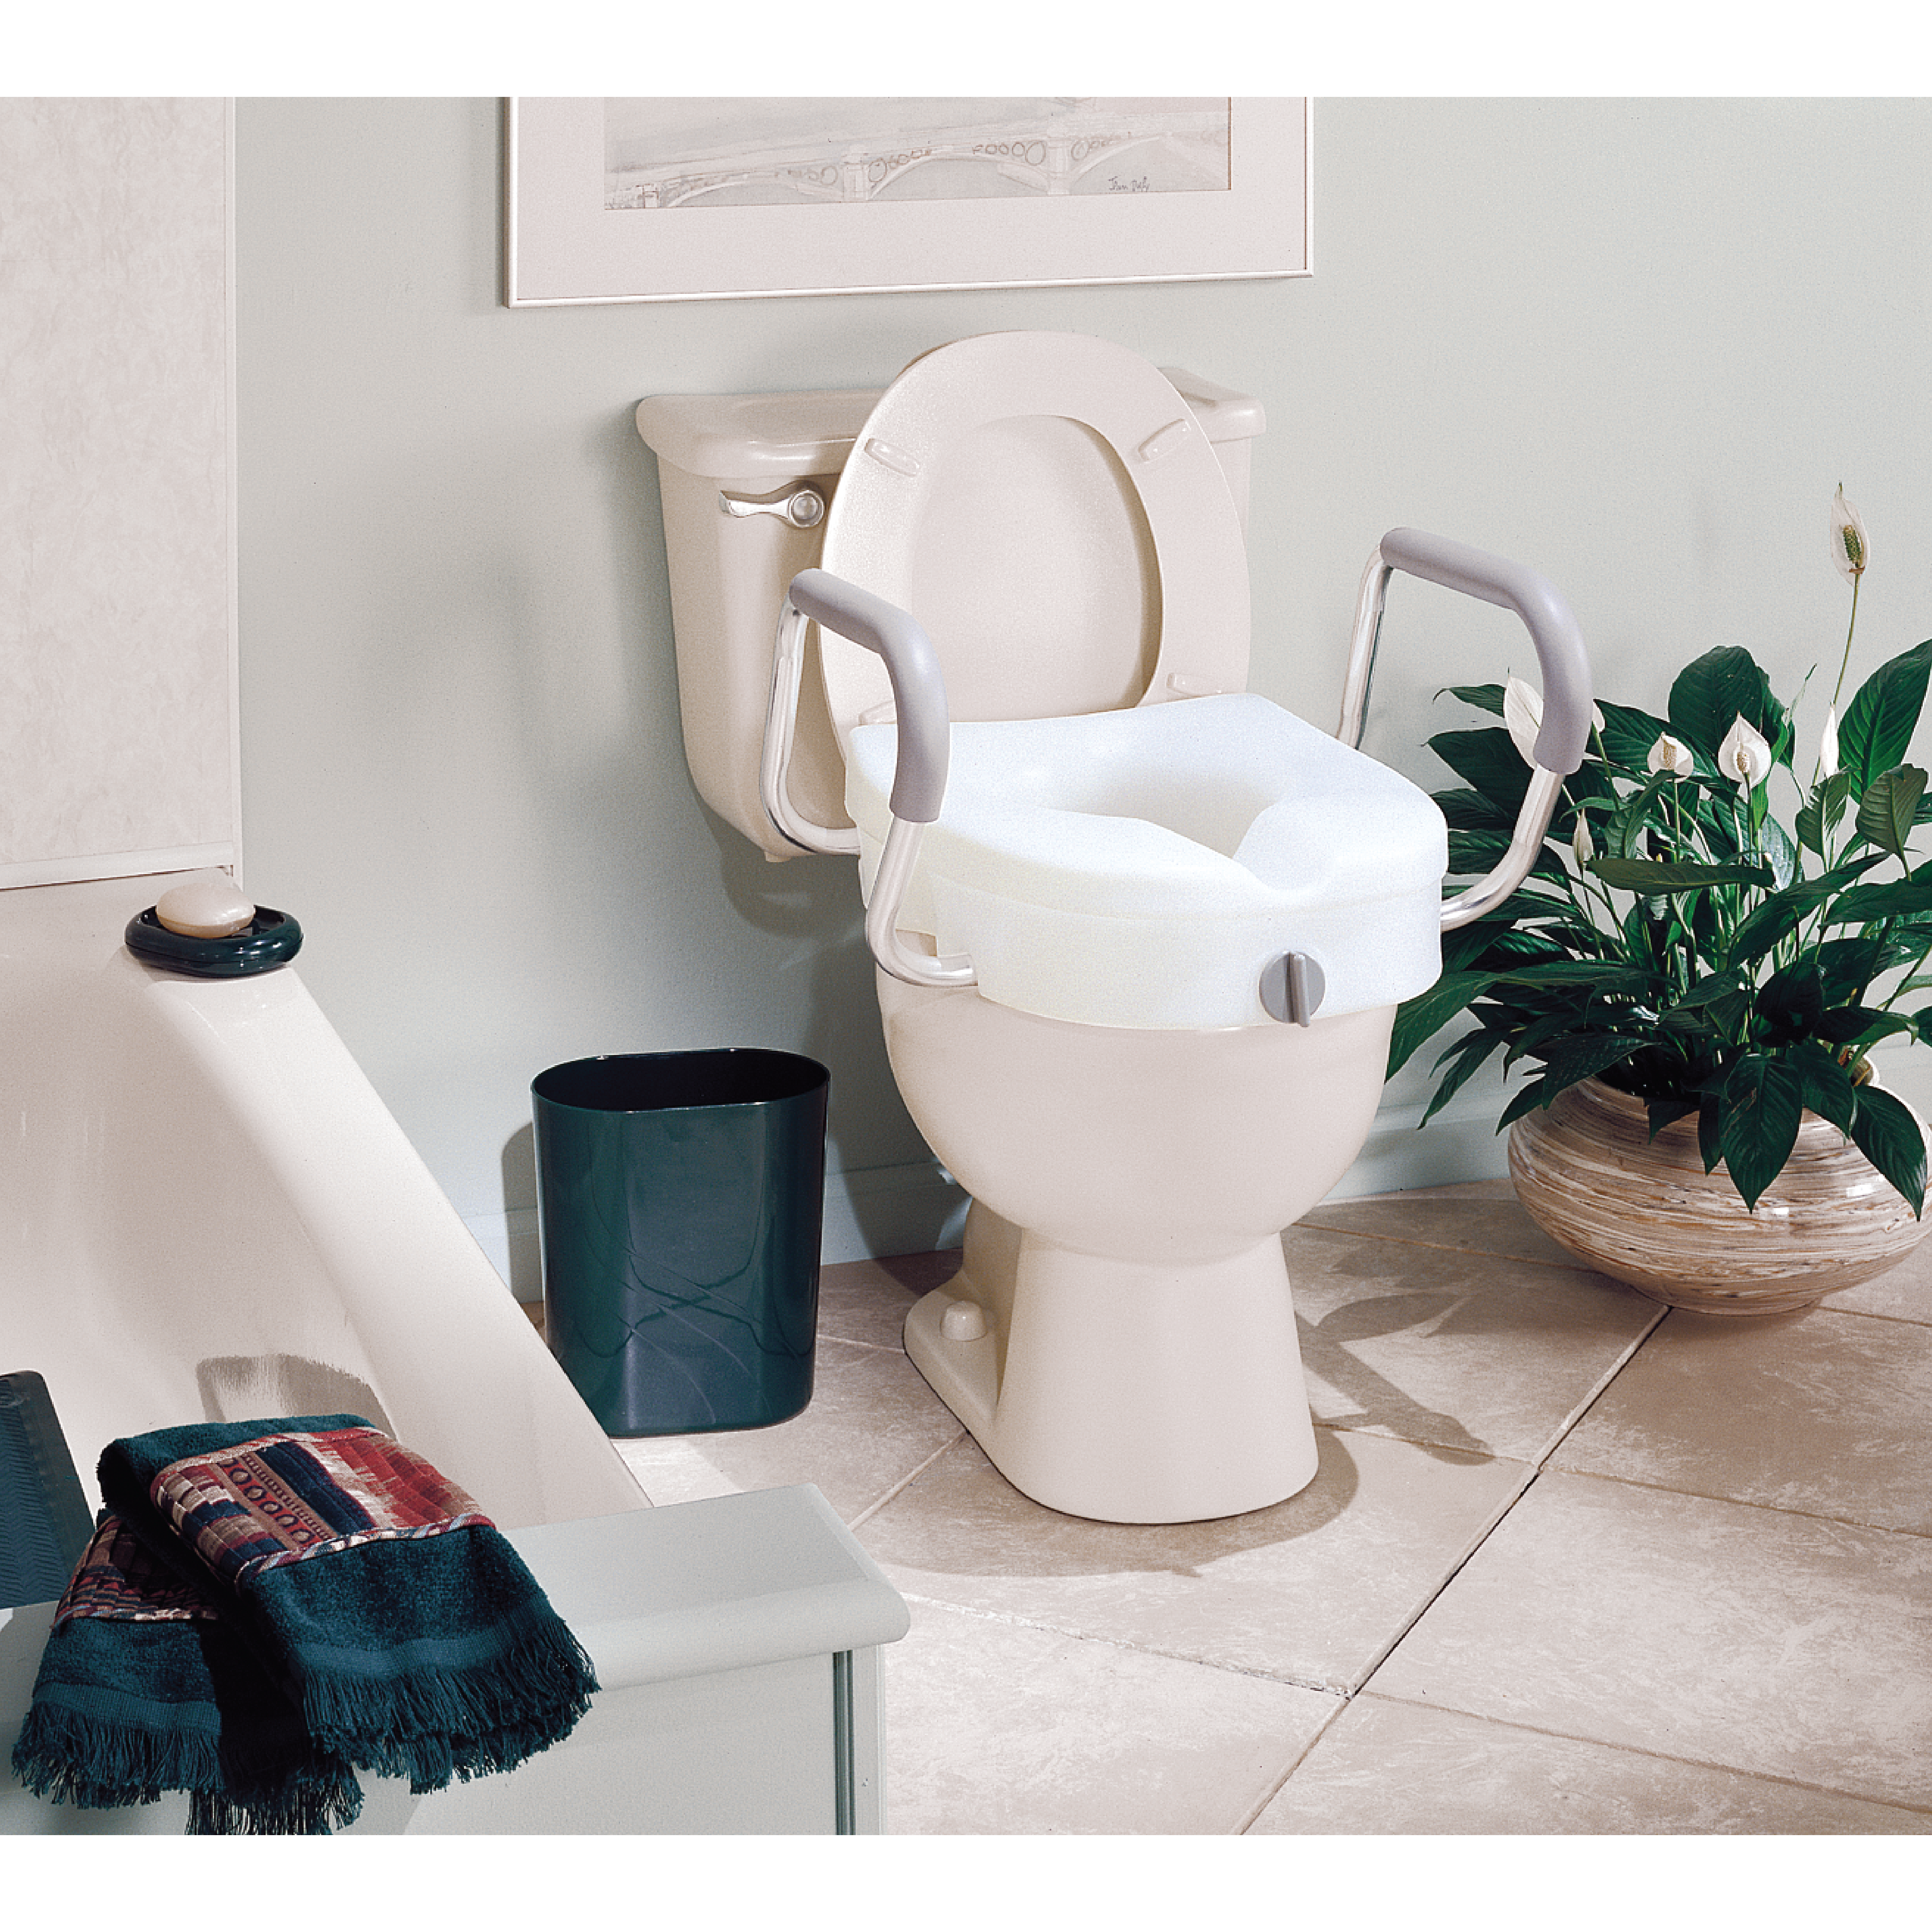 A raised toilet seat with armrests on a toilet